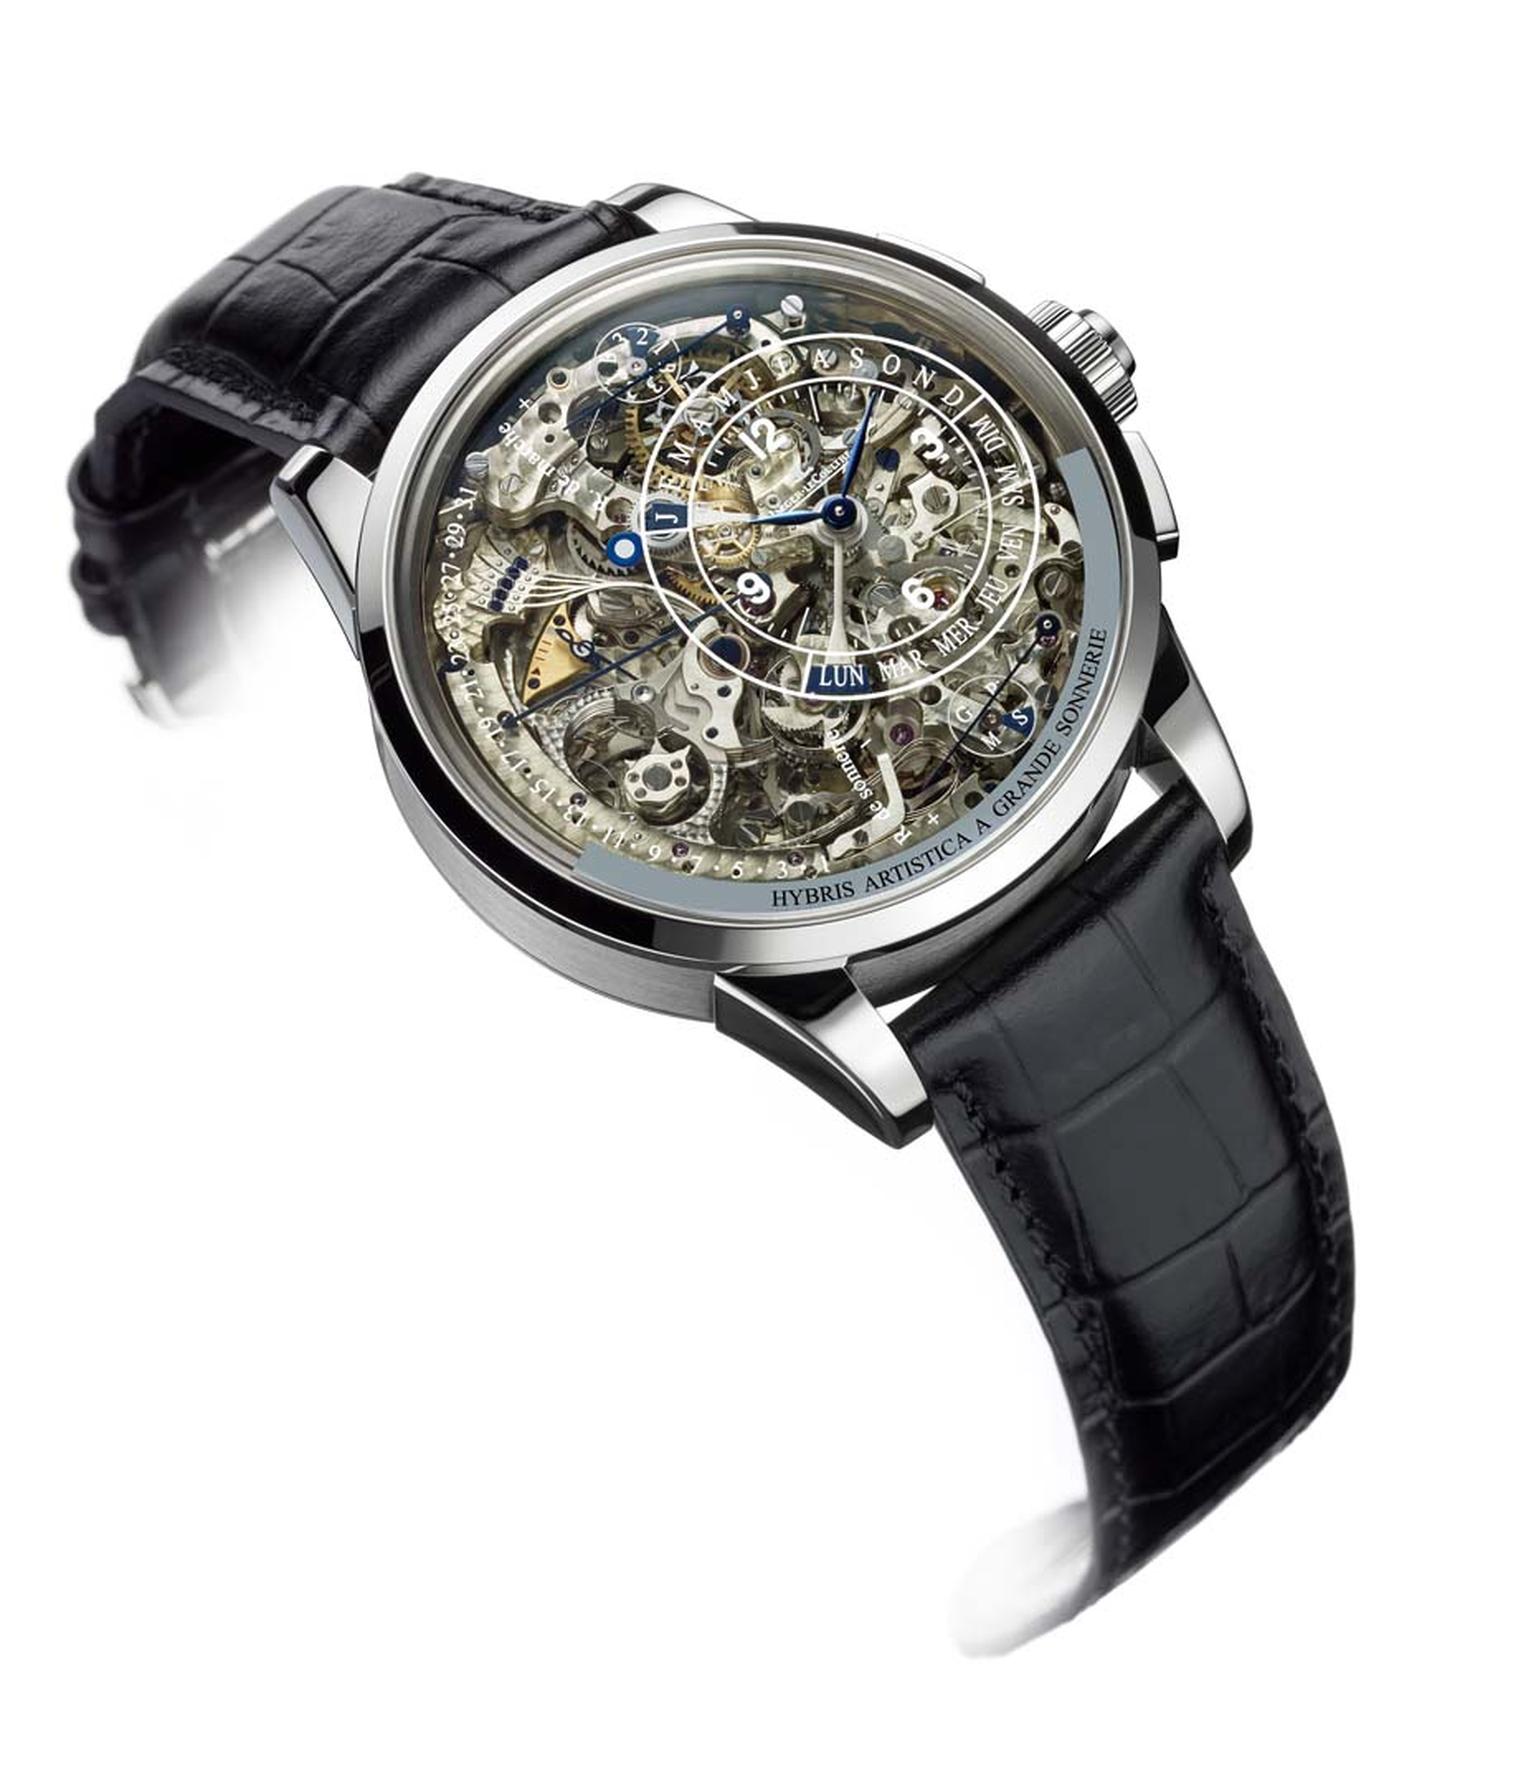 Jaeger-LeCoultre Hybris Artistica Collection Duomètre à Grande Sonnerie watch - the most complicated watch in the world - has been revisited for Hybris Artistica with a rock crystal dial to allow voyeurs an exclusive view of its movement